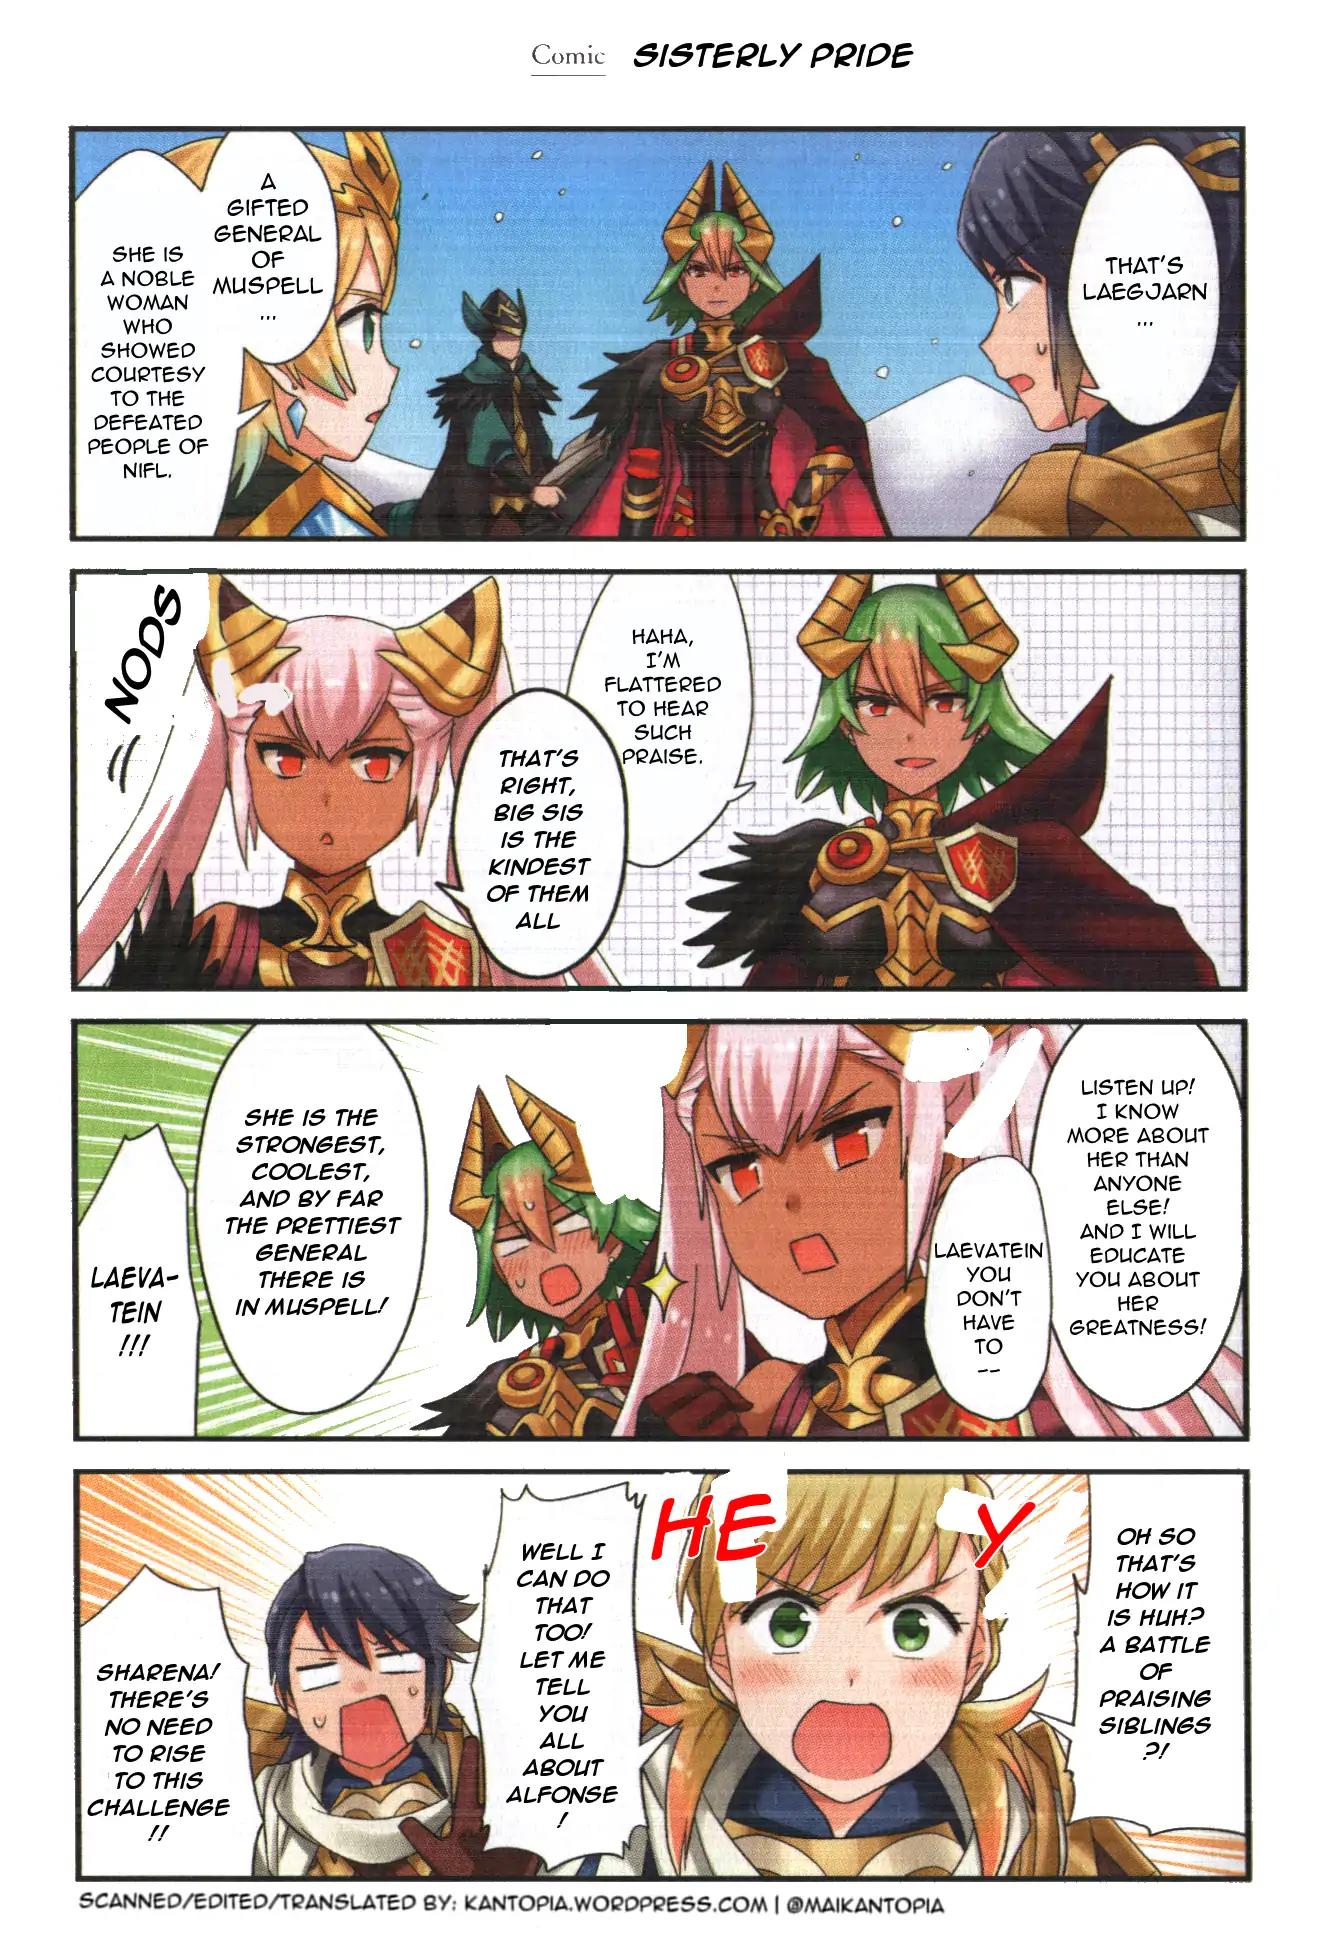 Fire Emblem Heroes Daily Lives of the Heroes Vol.1 Chapter 0.14: Character comic: